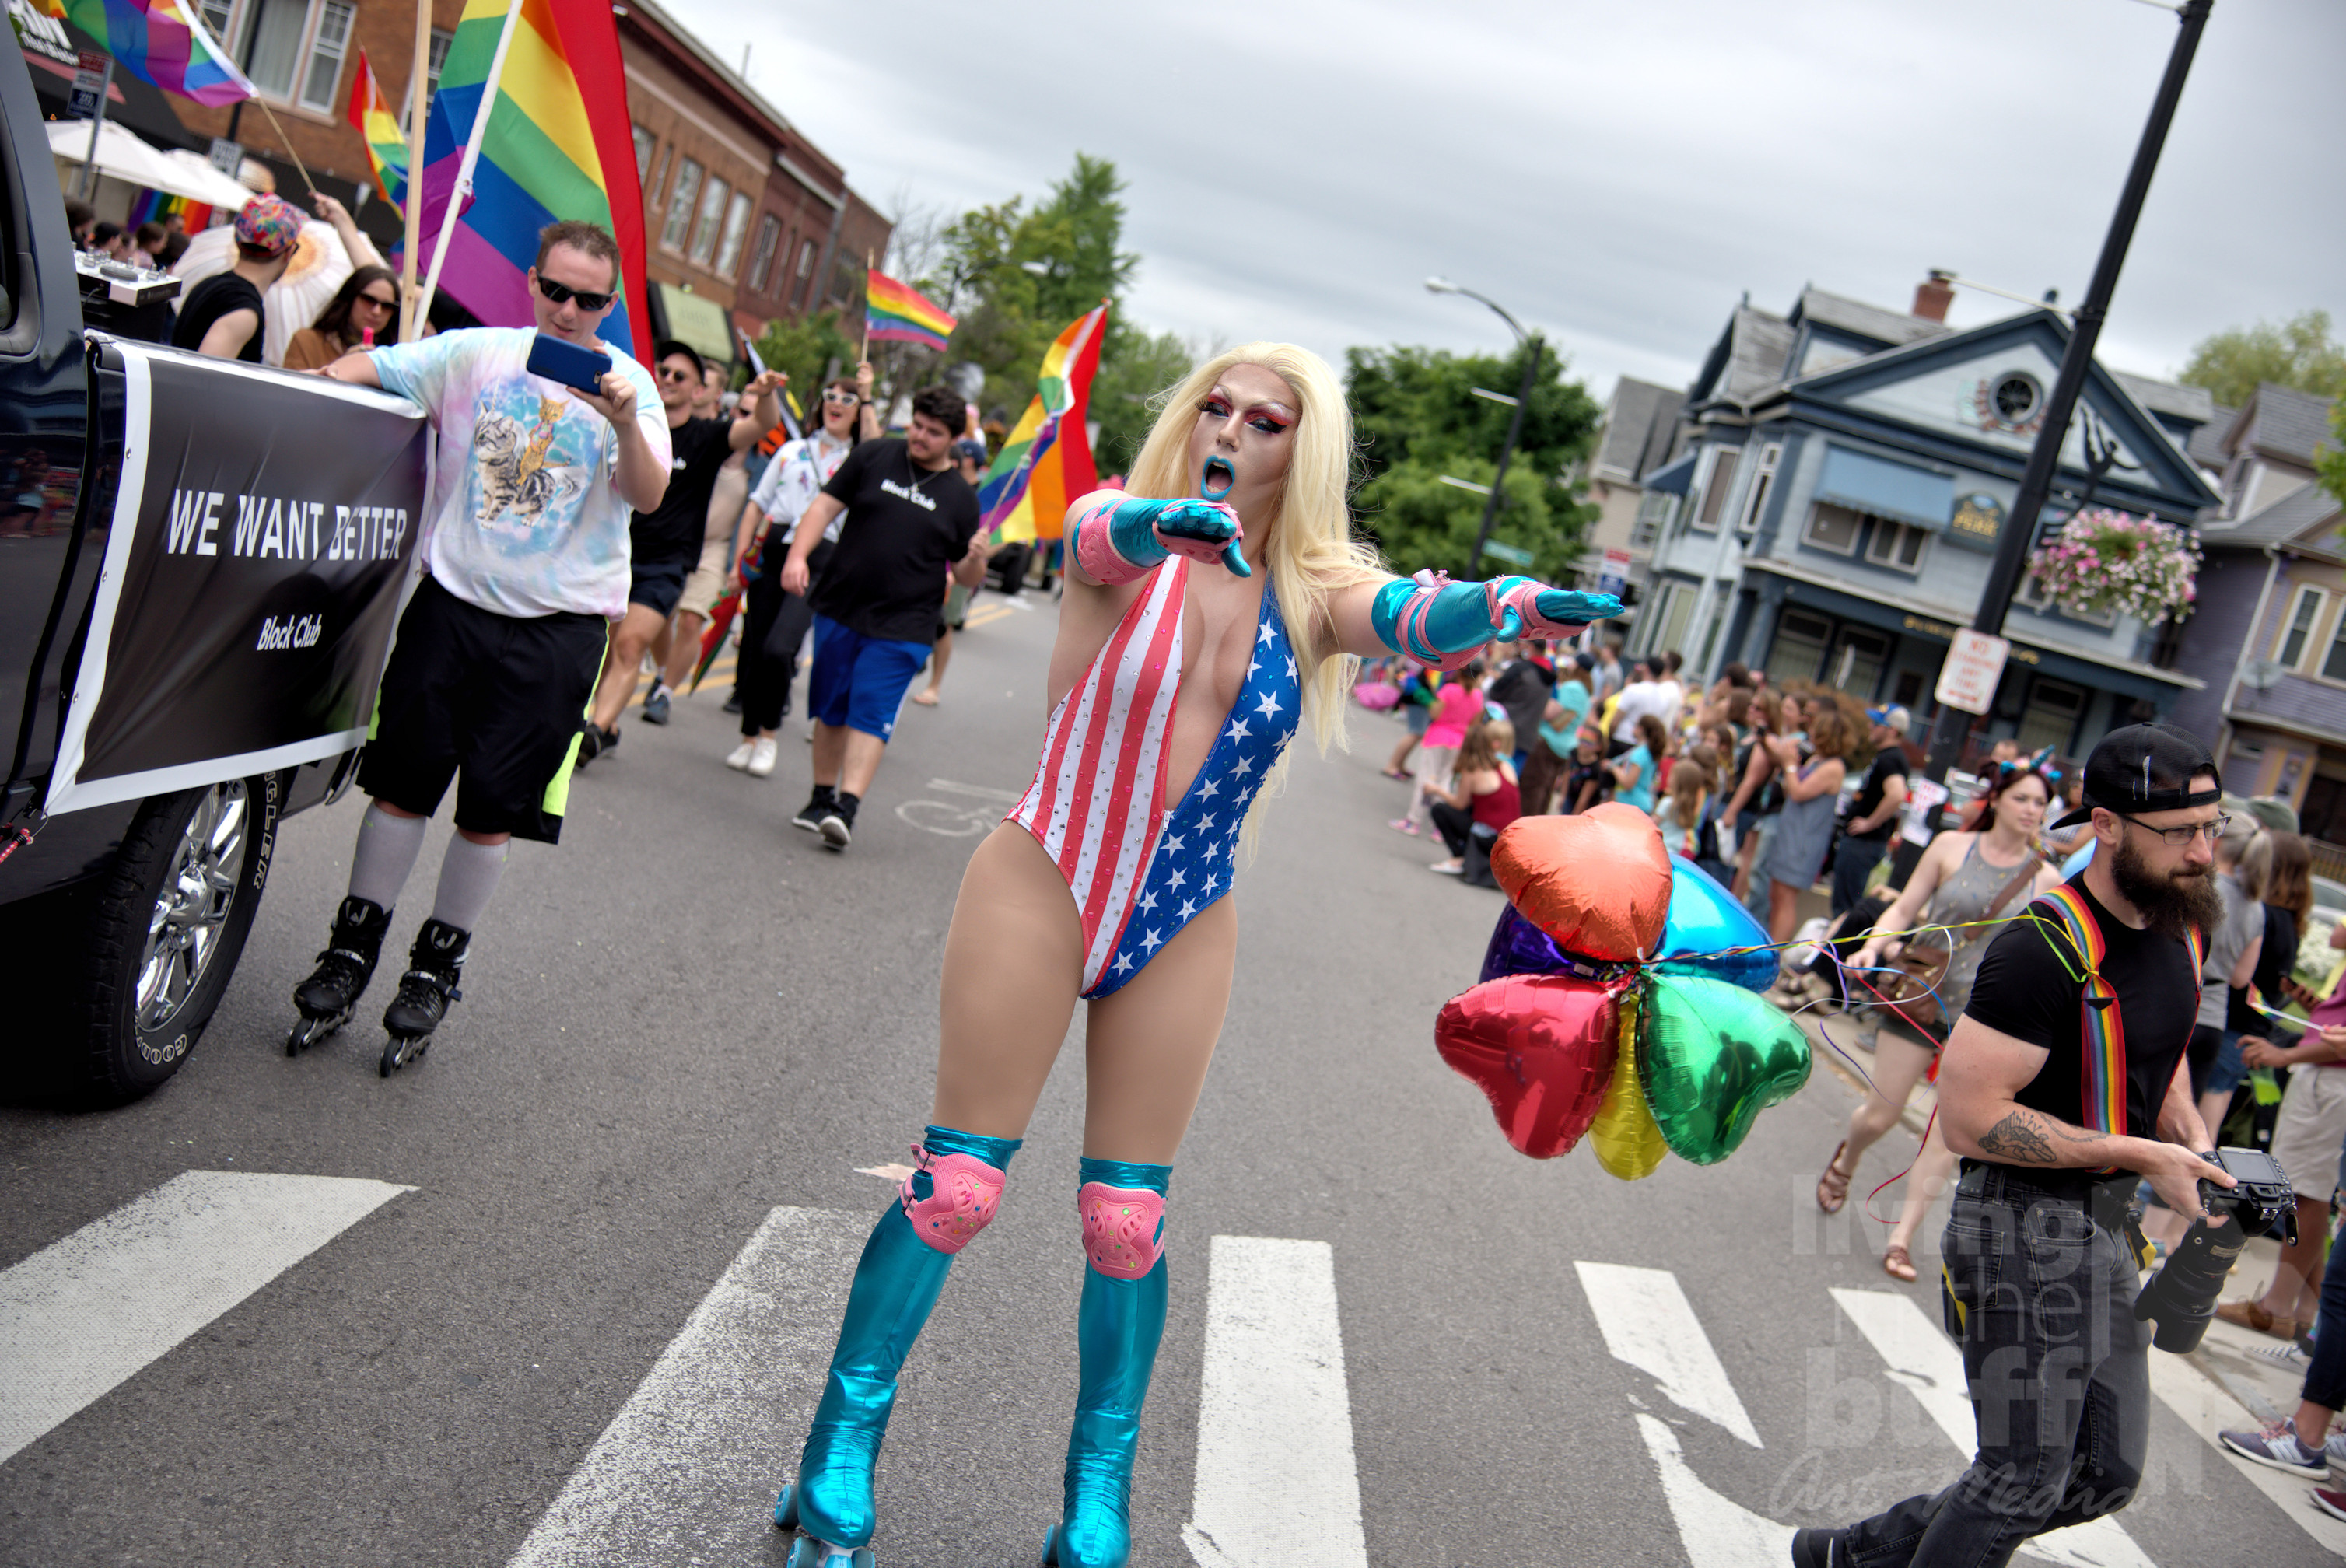 pictures of gay pride parade in buffalo